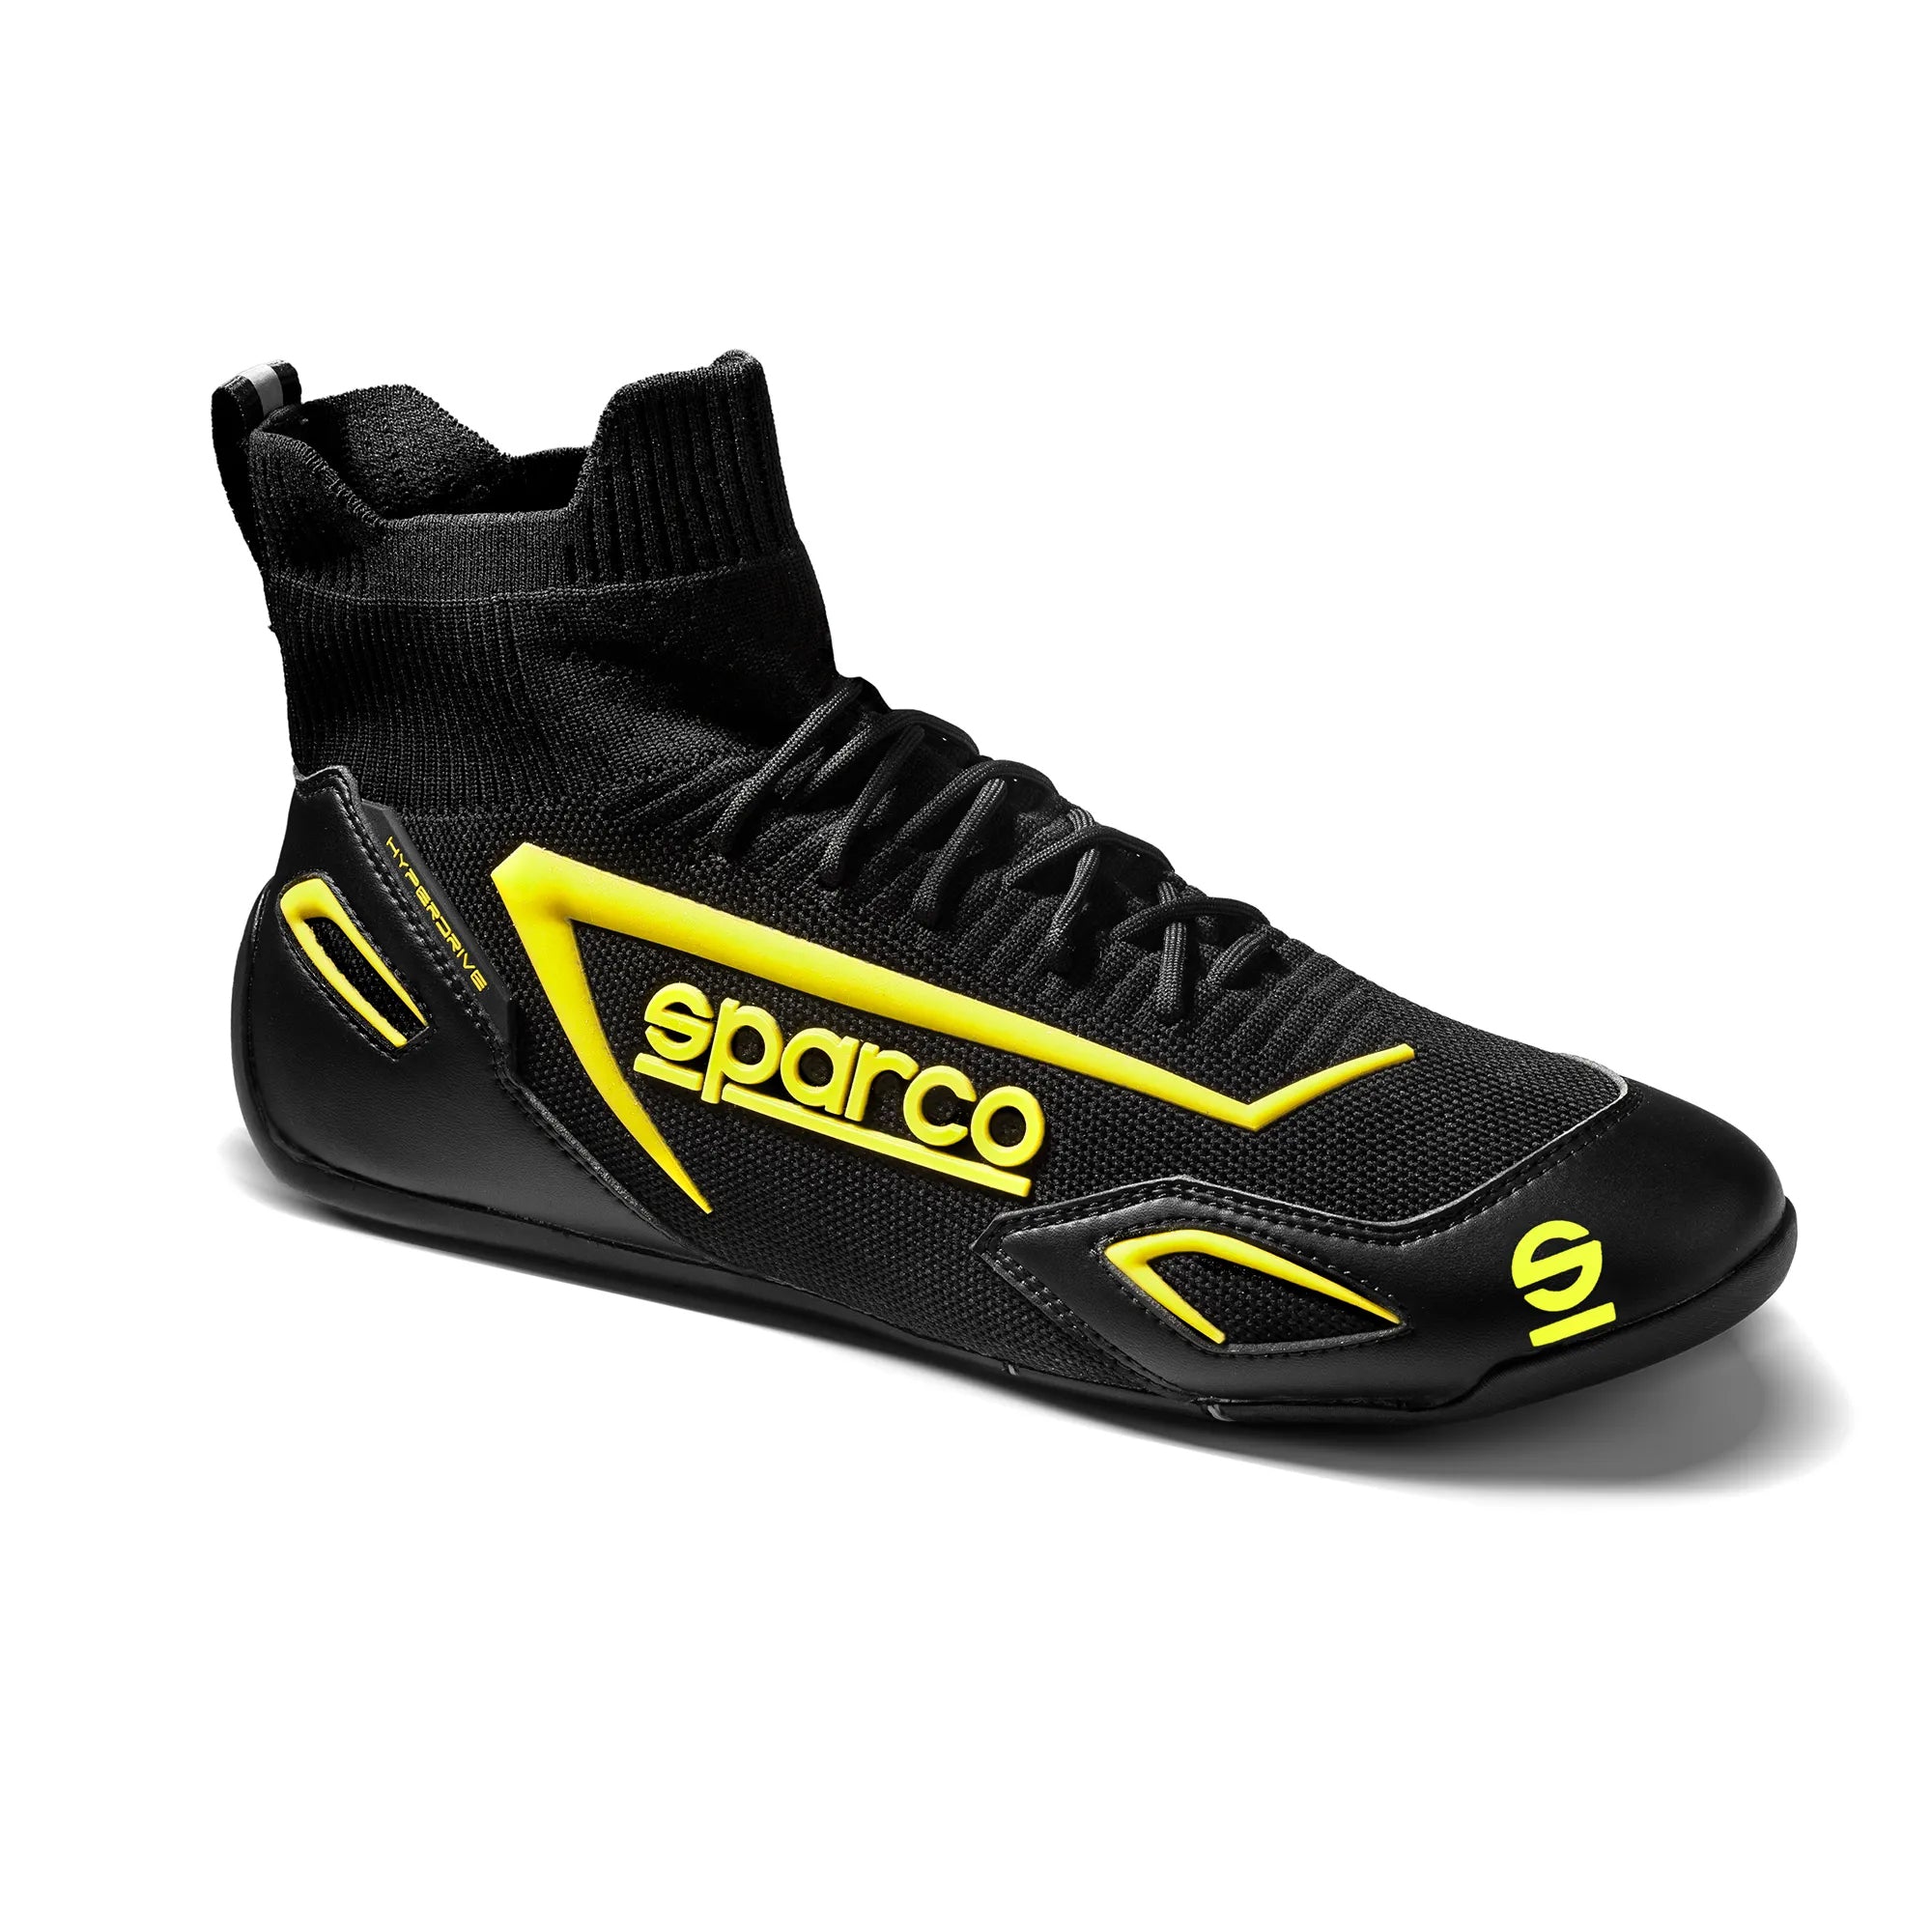 SPARCO 00129346NRGF Gaming sim racing shoes HYPERDRIVE, black/yellow, size 46 Photo-1 